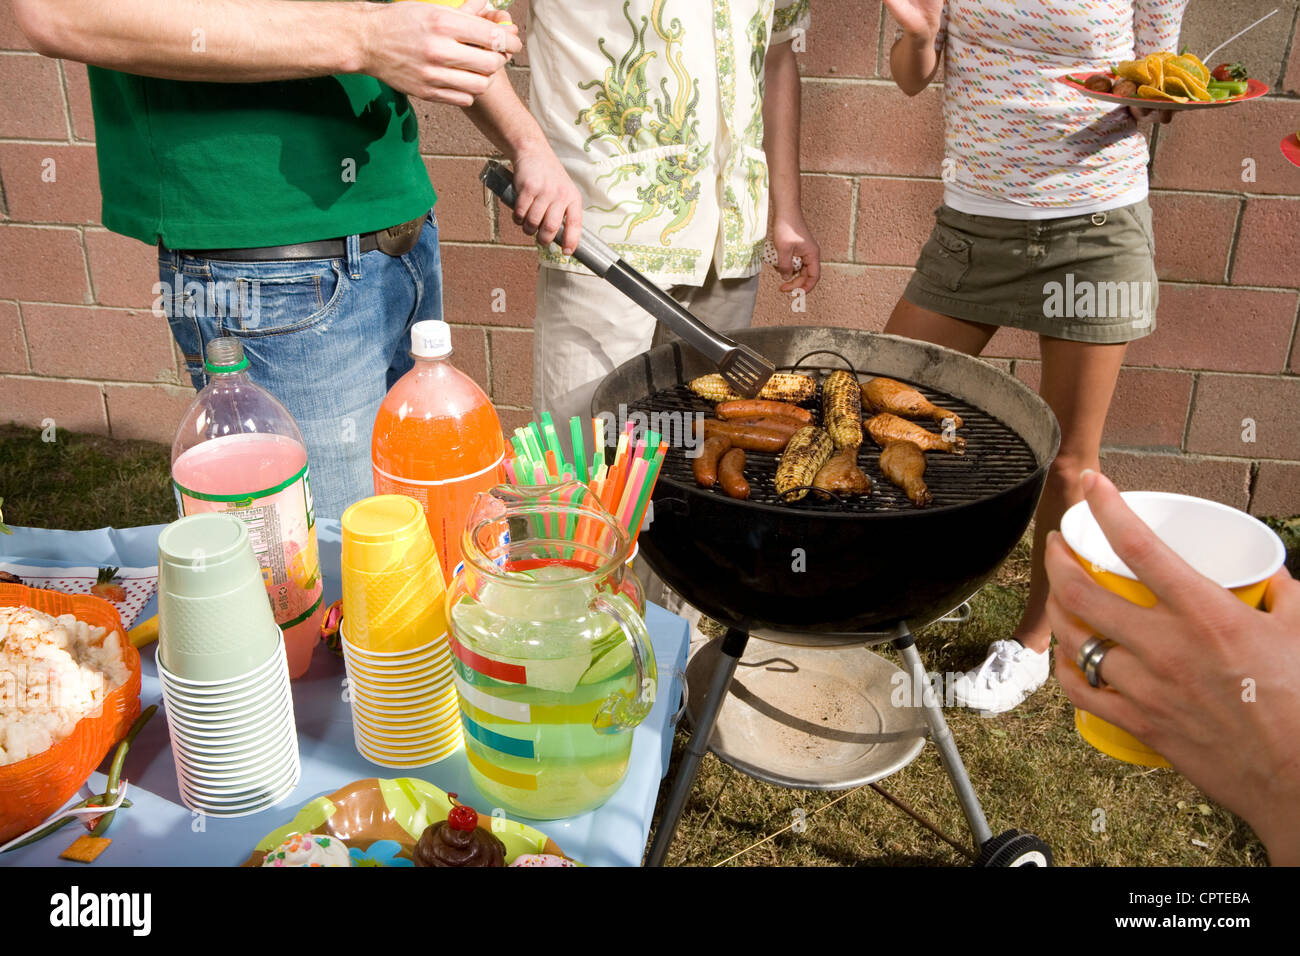 Man cooking with friends at barbecue Stock Photo